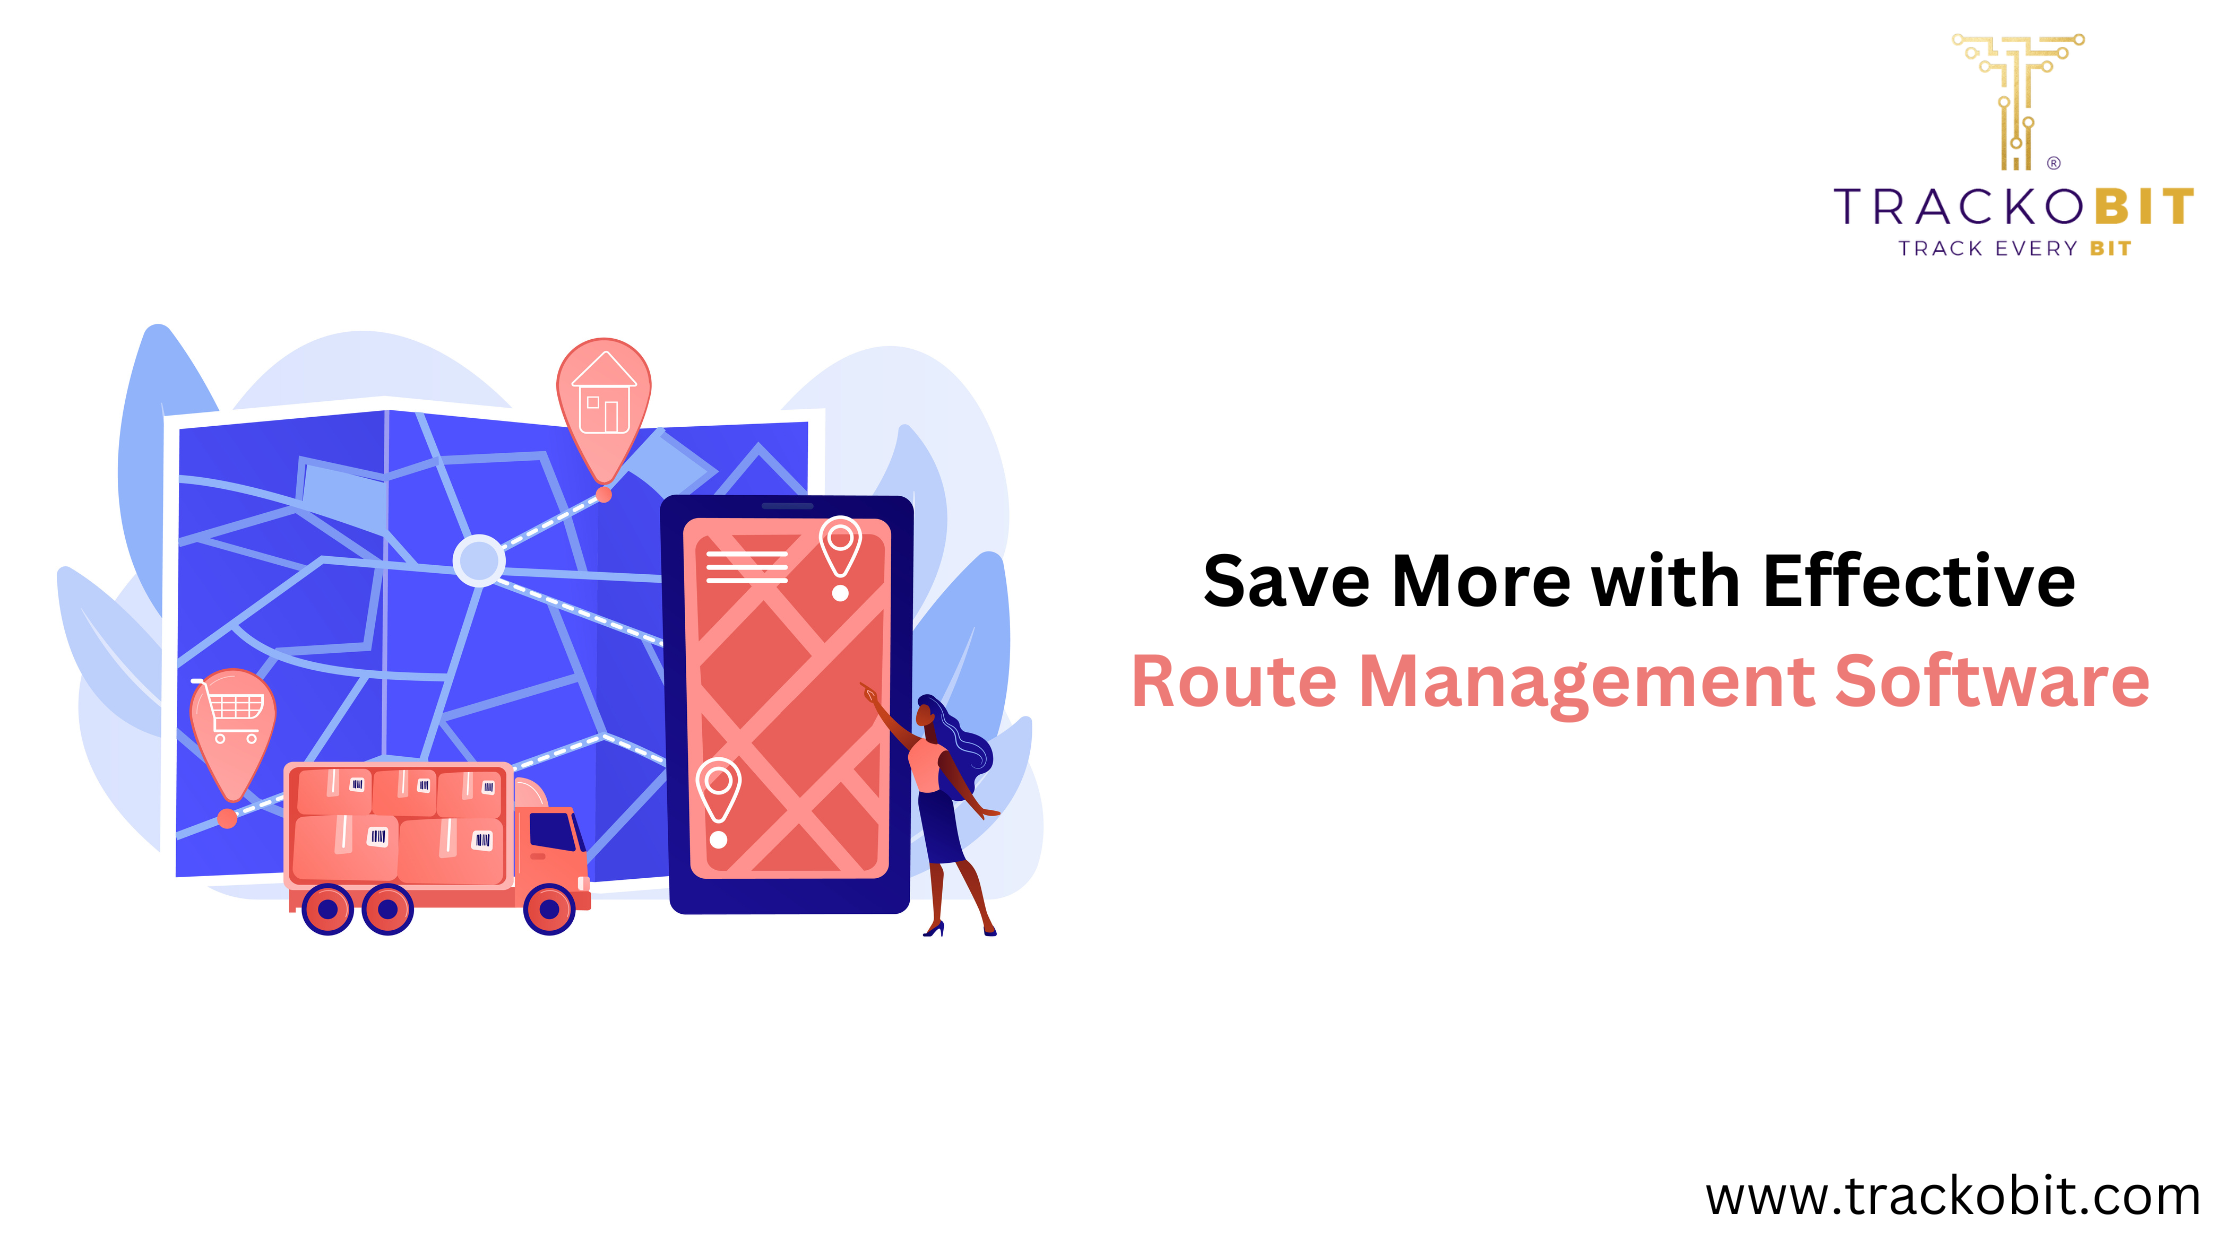 Save More with Effective Route Management Software